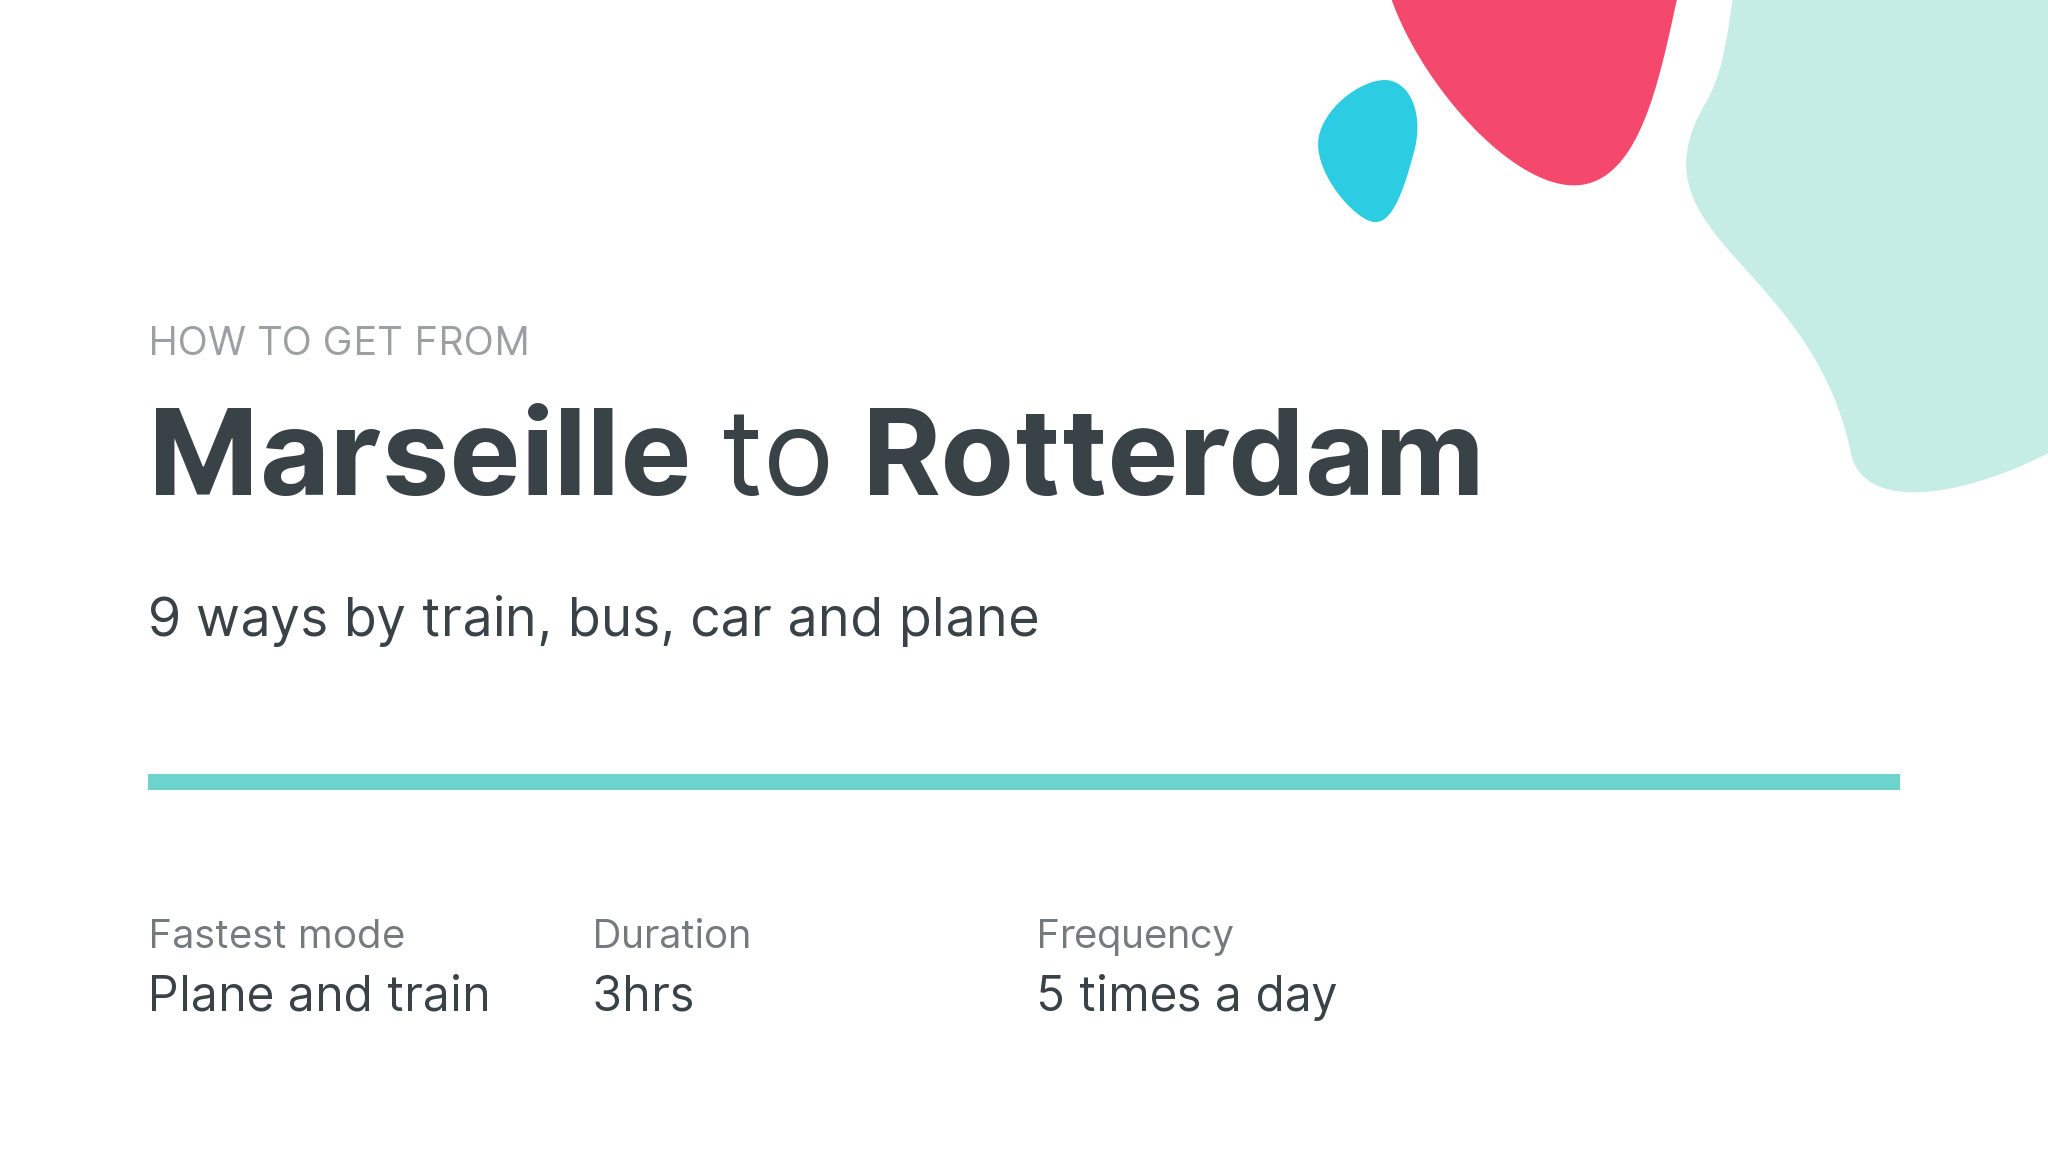 How do I get from Marseille to Rotterdam